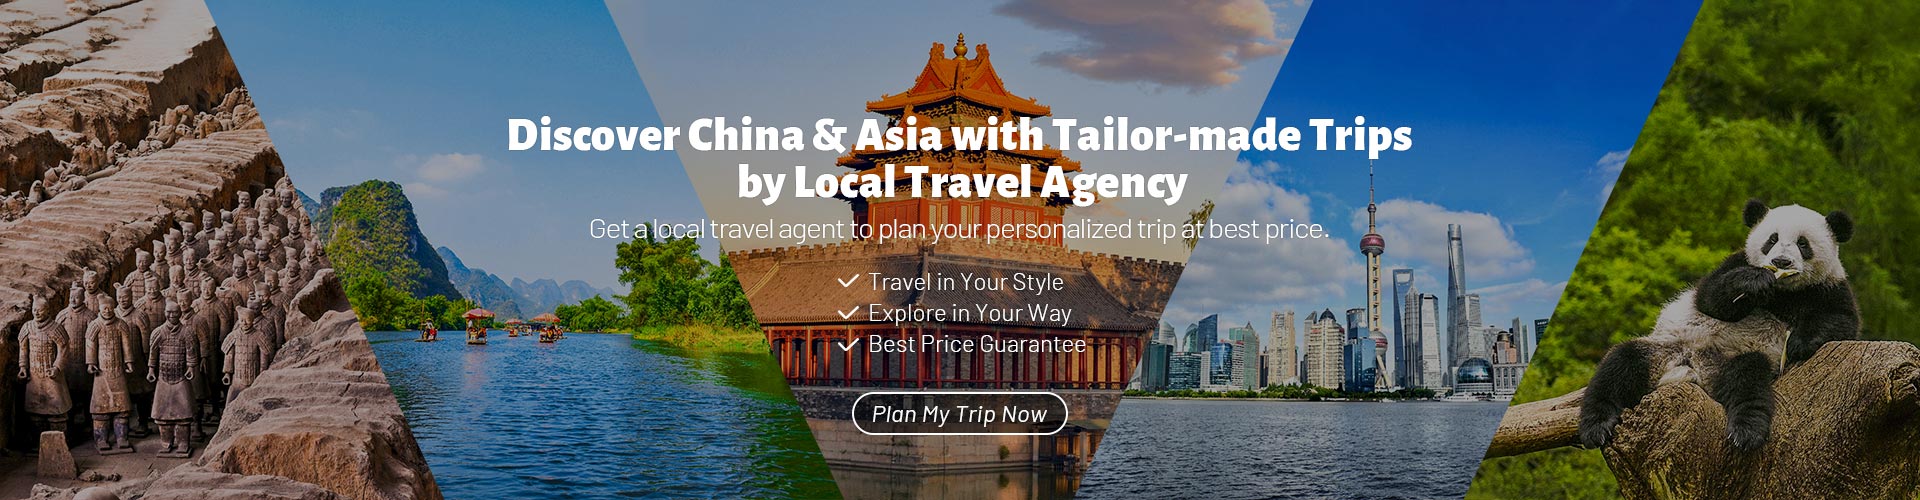 Tailor Make Your China & Asia Trips with Asia Odyssey Travel